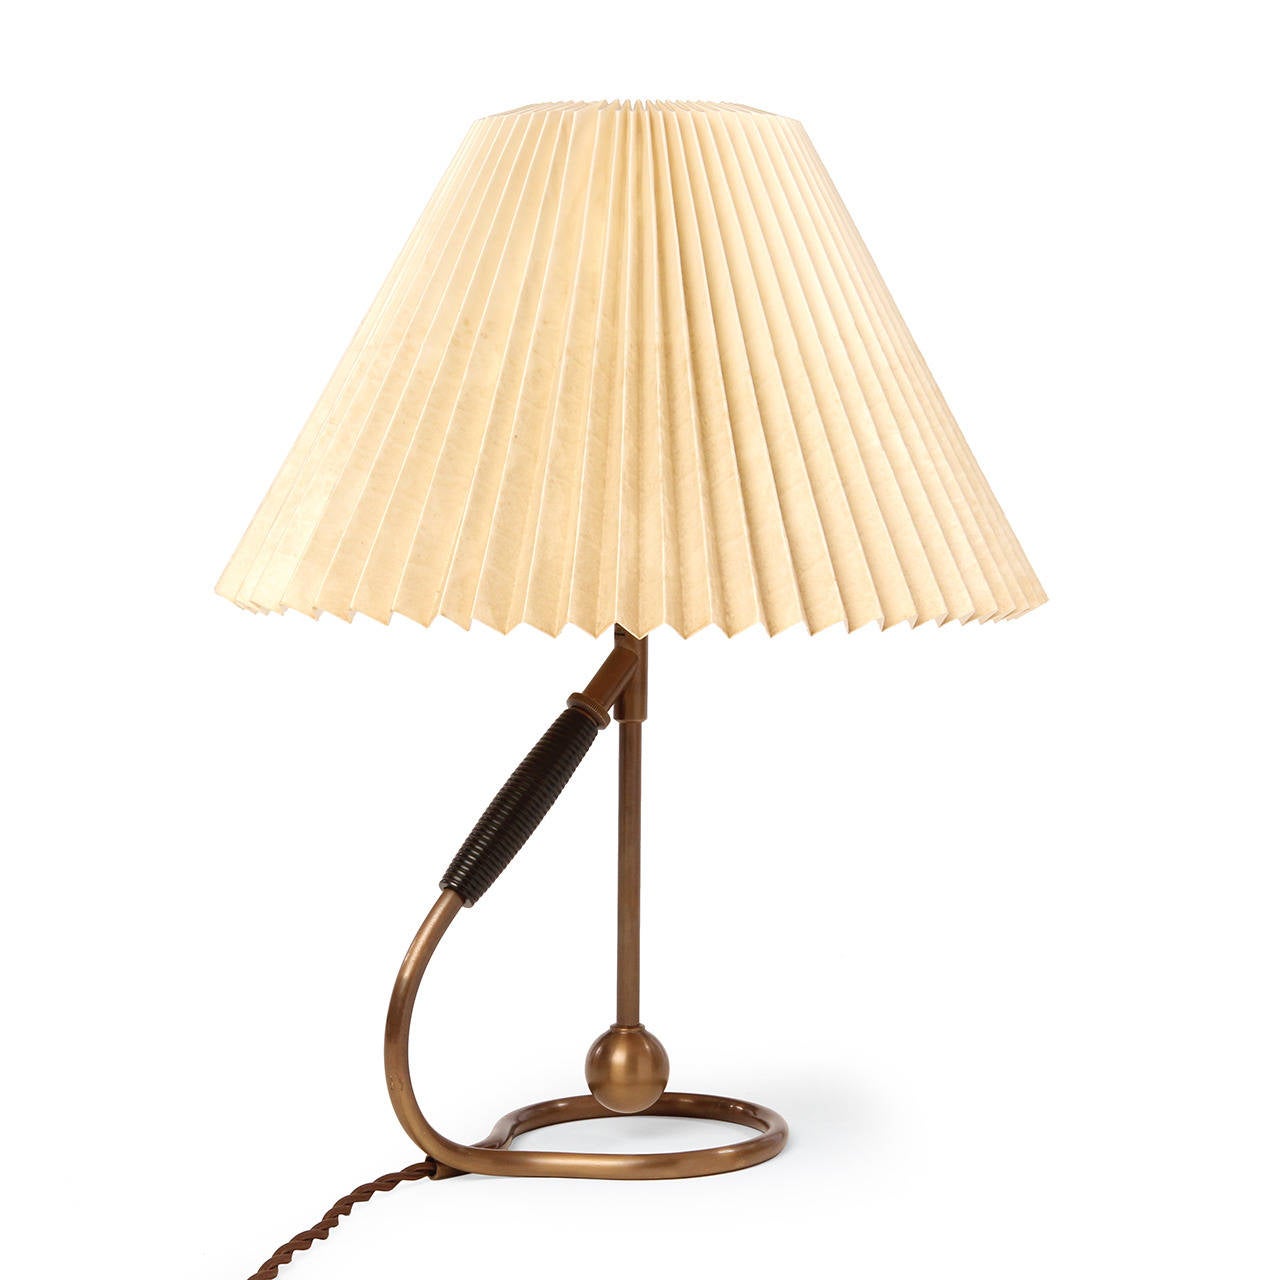 A sculptural, versatile and elegant lamp in warm lacquered brass with a pleated paper shade, having a rotating mechanism that enables different angles to be locked in place, allowing it to be used both as a table and wall-mounted lamp.